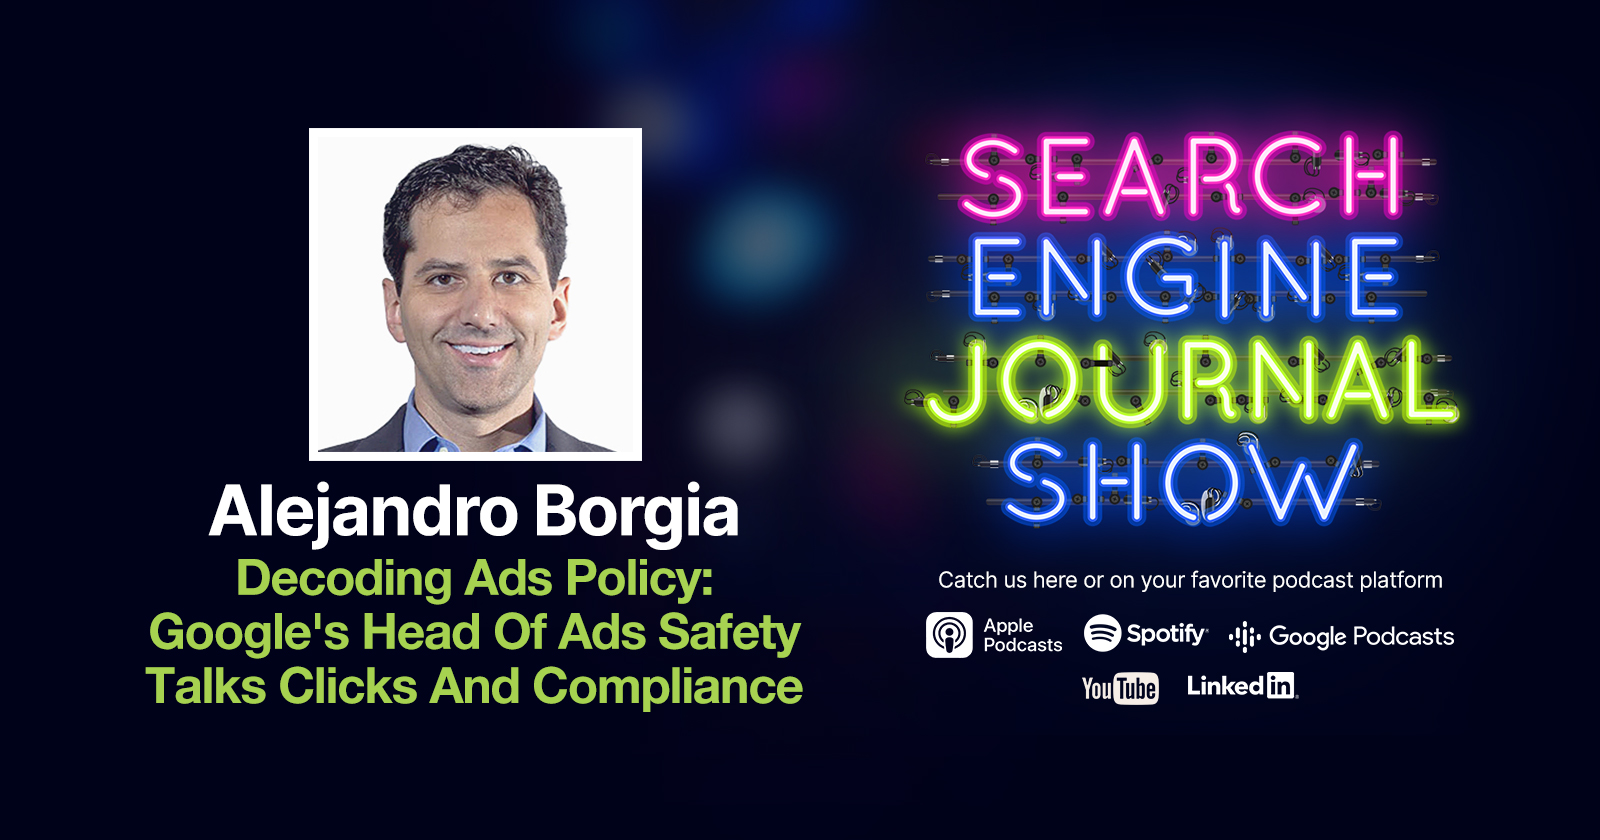 Google’s Head of Ads Safety talks about clicks and compliance [Podcast]